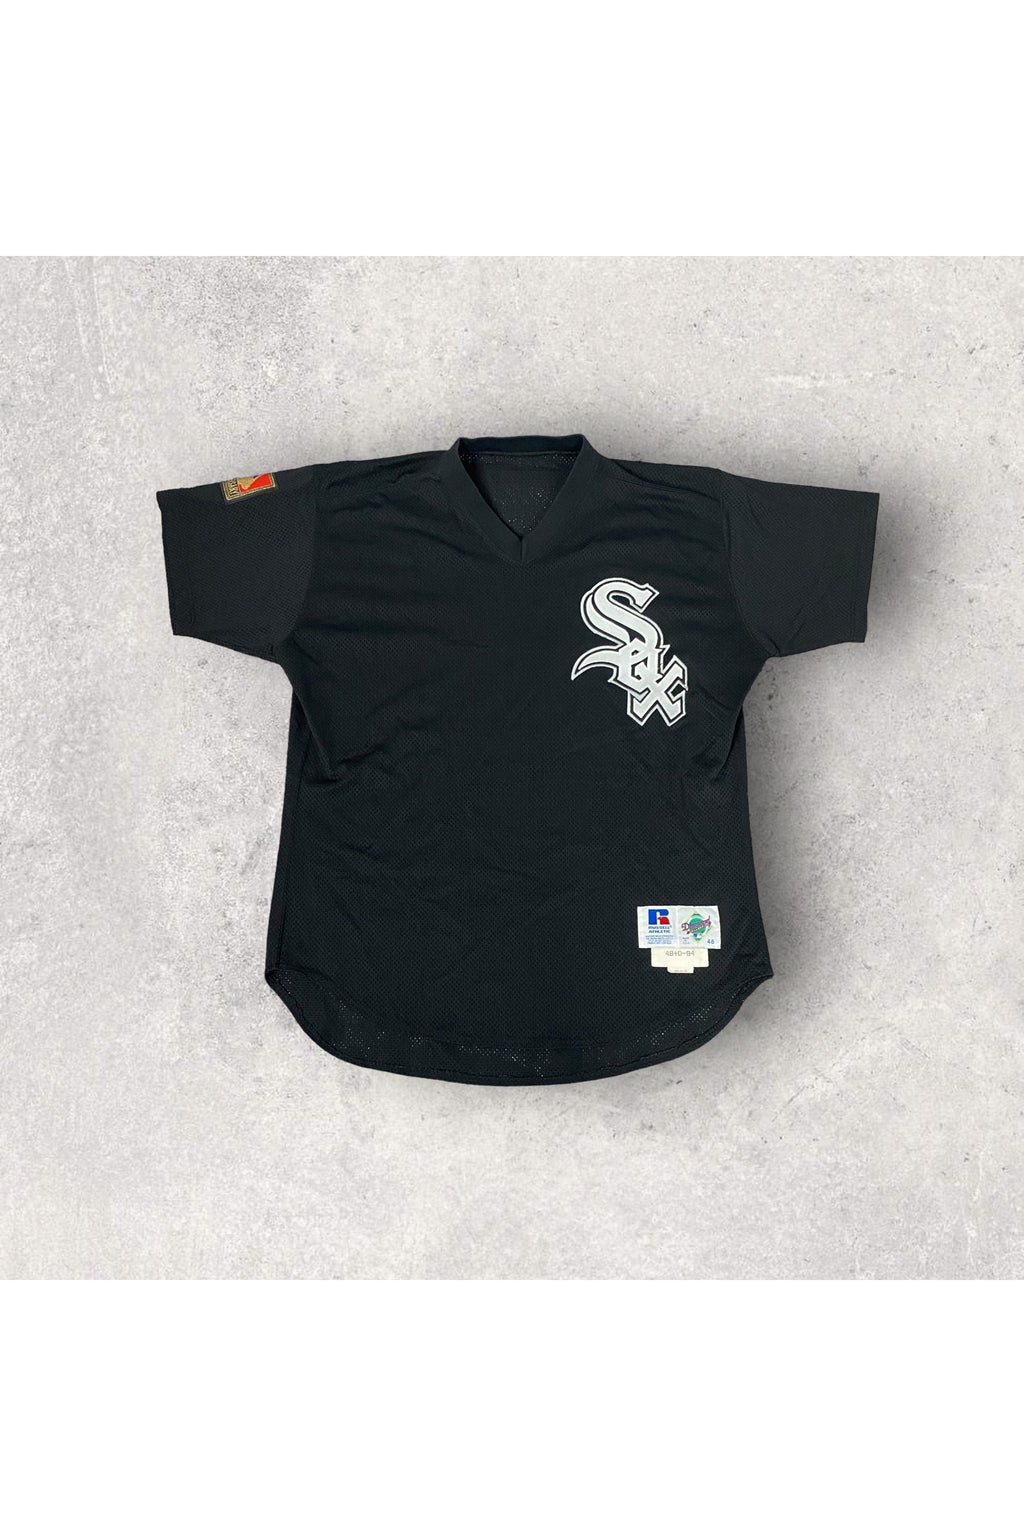 Chicago White Sox Russell Athletic Vintage Baseball Jersey (48)